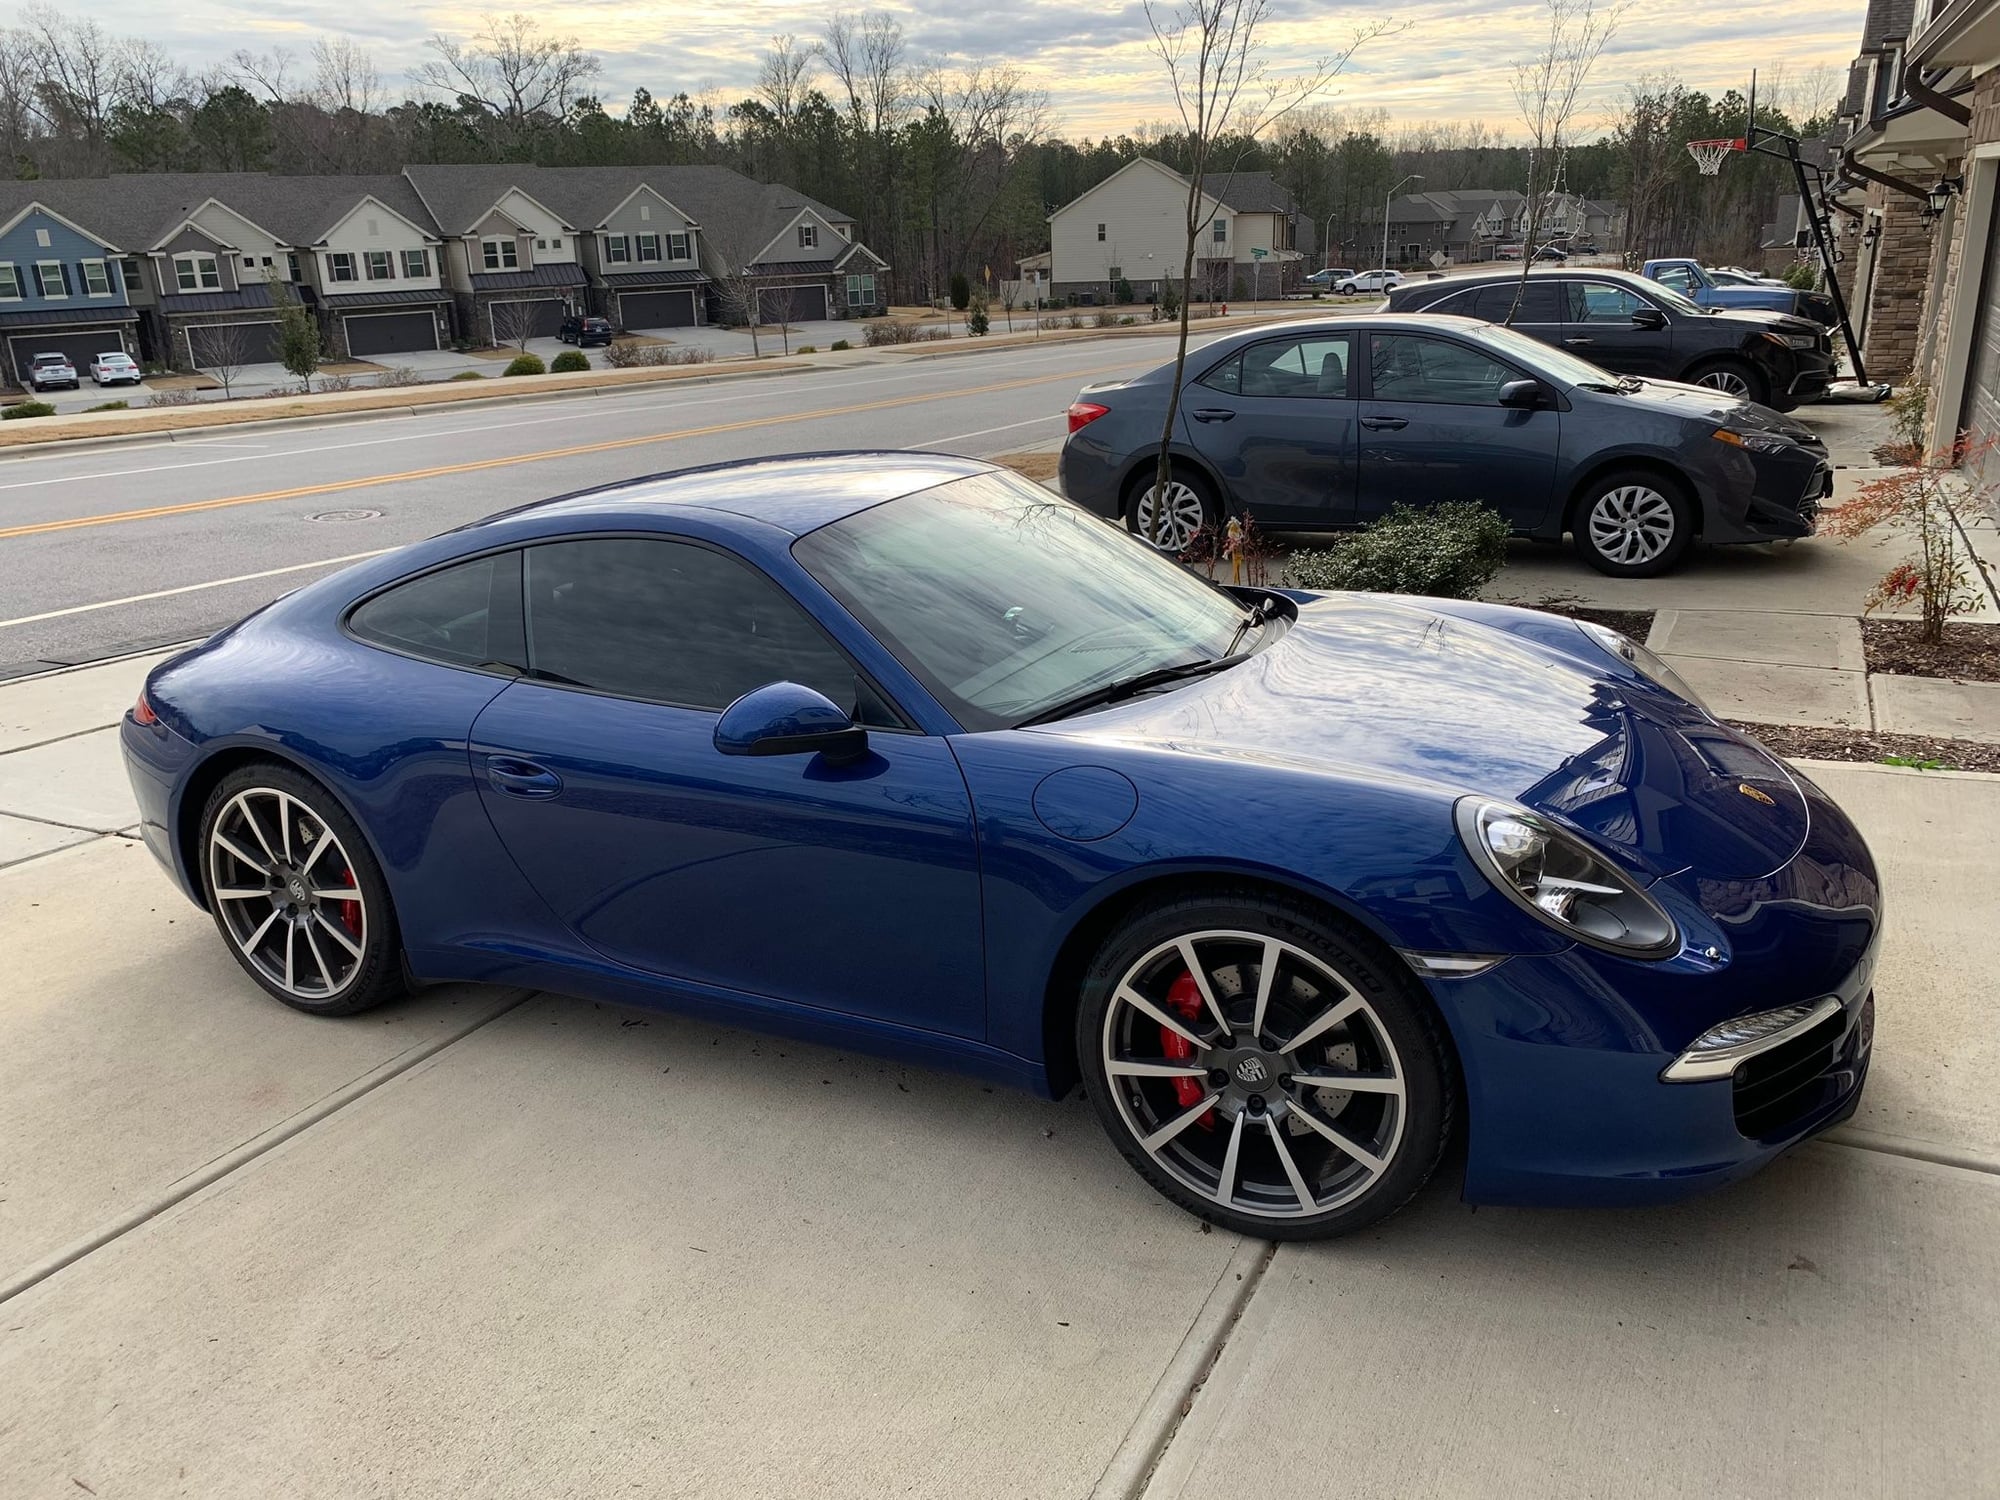 2012 Porsche 911 - 2012 Porsche 911 Carrera S (991.1) PDK - Used - VIN WP0AB2A92CS121659 - 31,000 Miles - 6 cyl - 2WD - Automatic - Coupe - Blue - Cary, NC 27519, United States